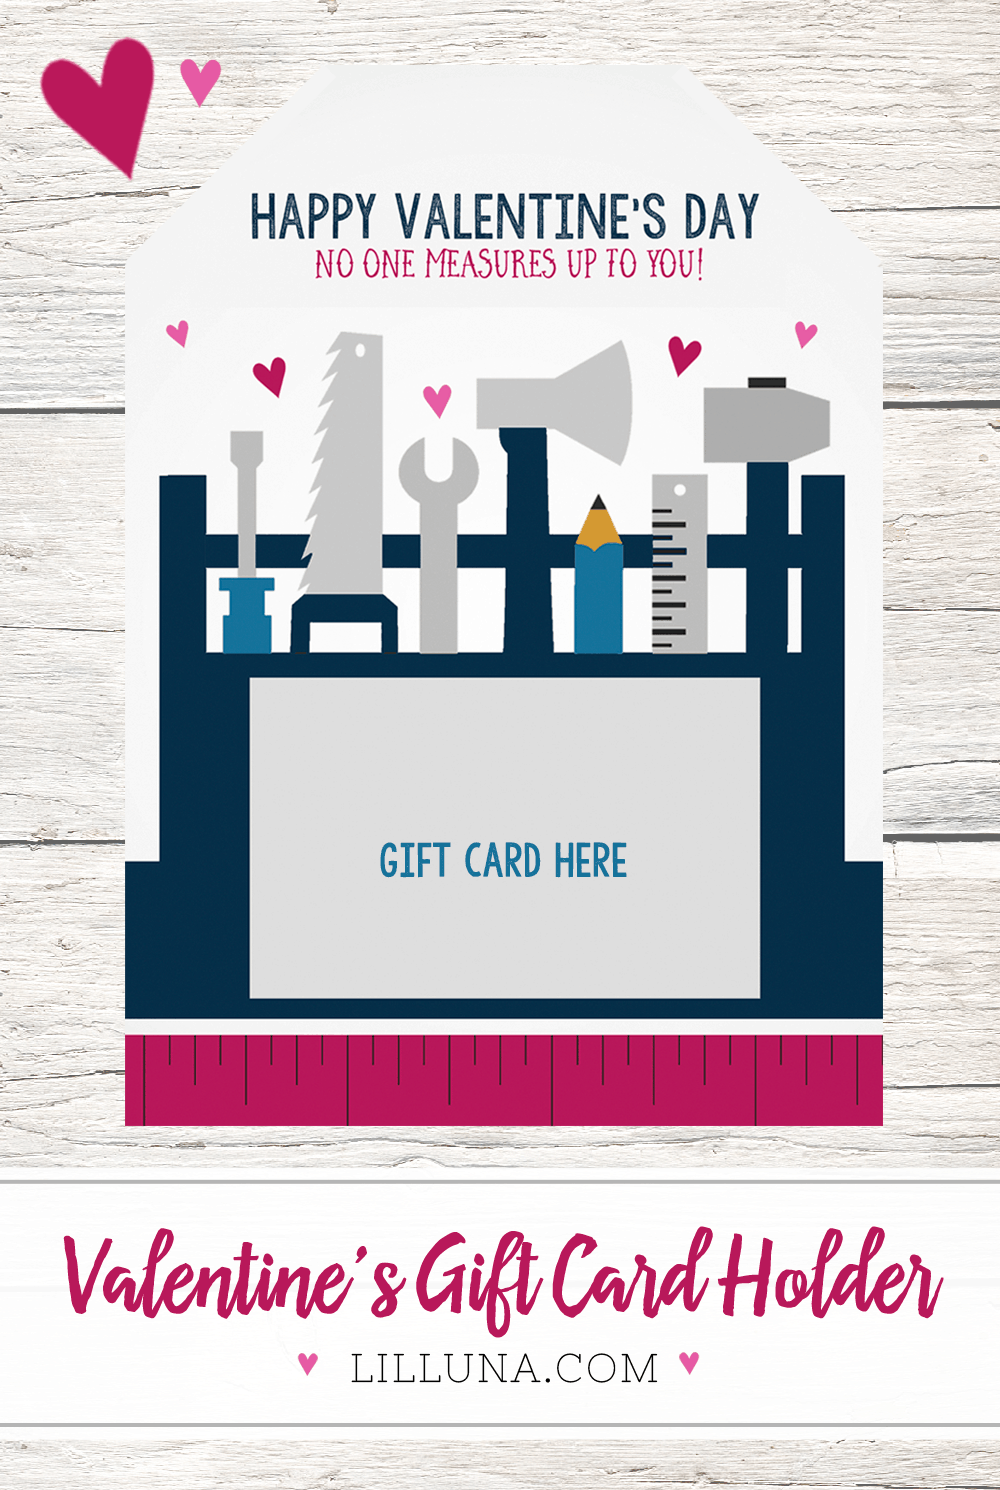 FREE Valentine's Day Gift Card Holder - No one measures up to you!! Perfect for your loved one and so cute!